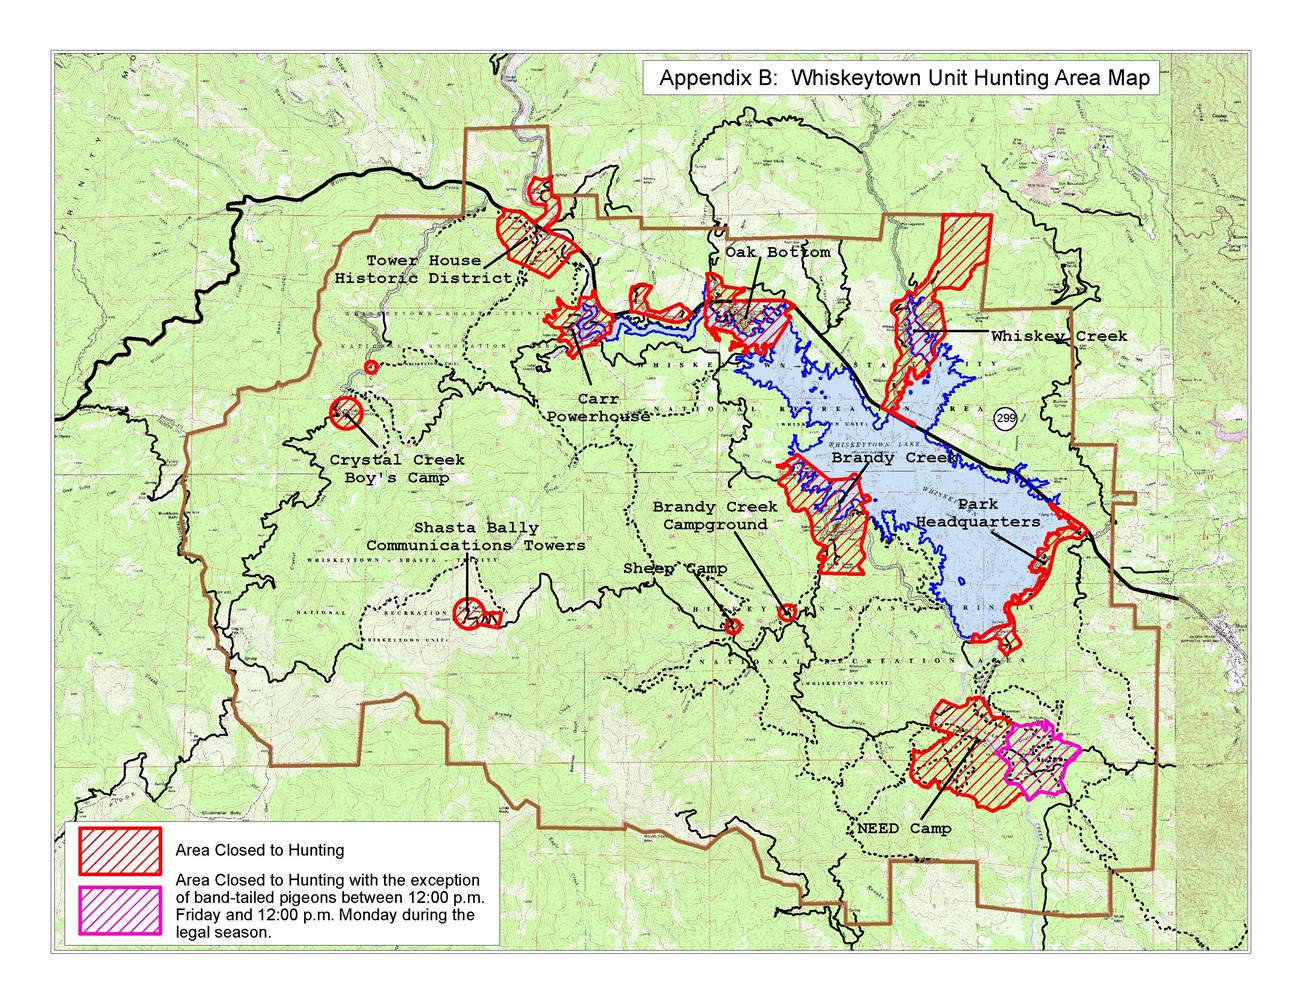 Whiskeytown Hunting Area Map Showing Closed Areas